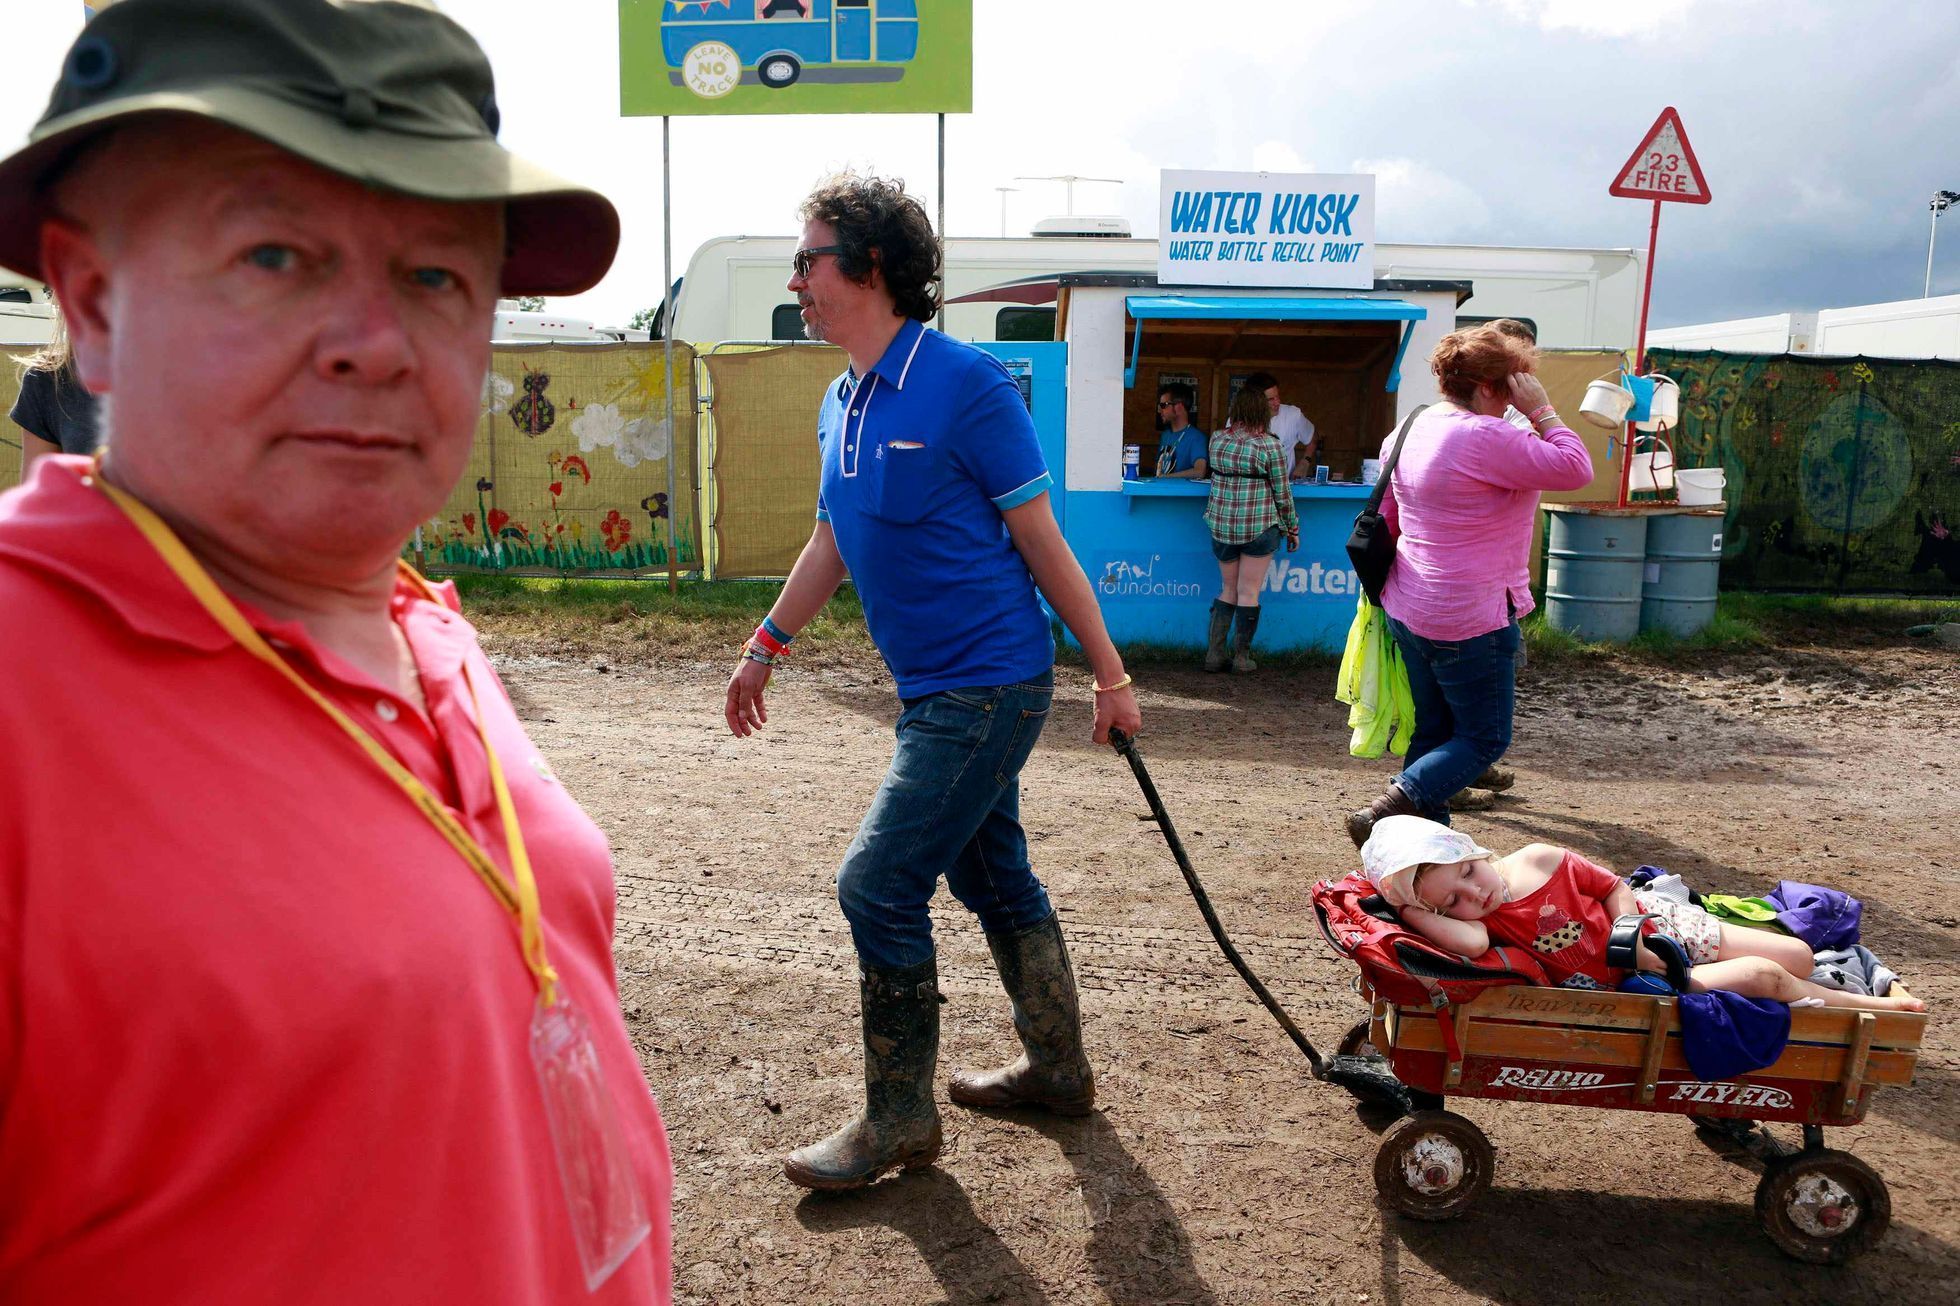 A man pulls his child in a trailer around Worthy Farm in Somerset, during the Glastonbury Festival